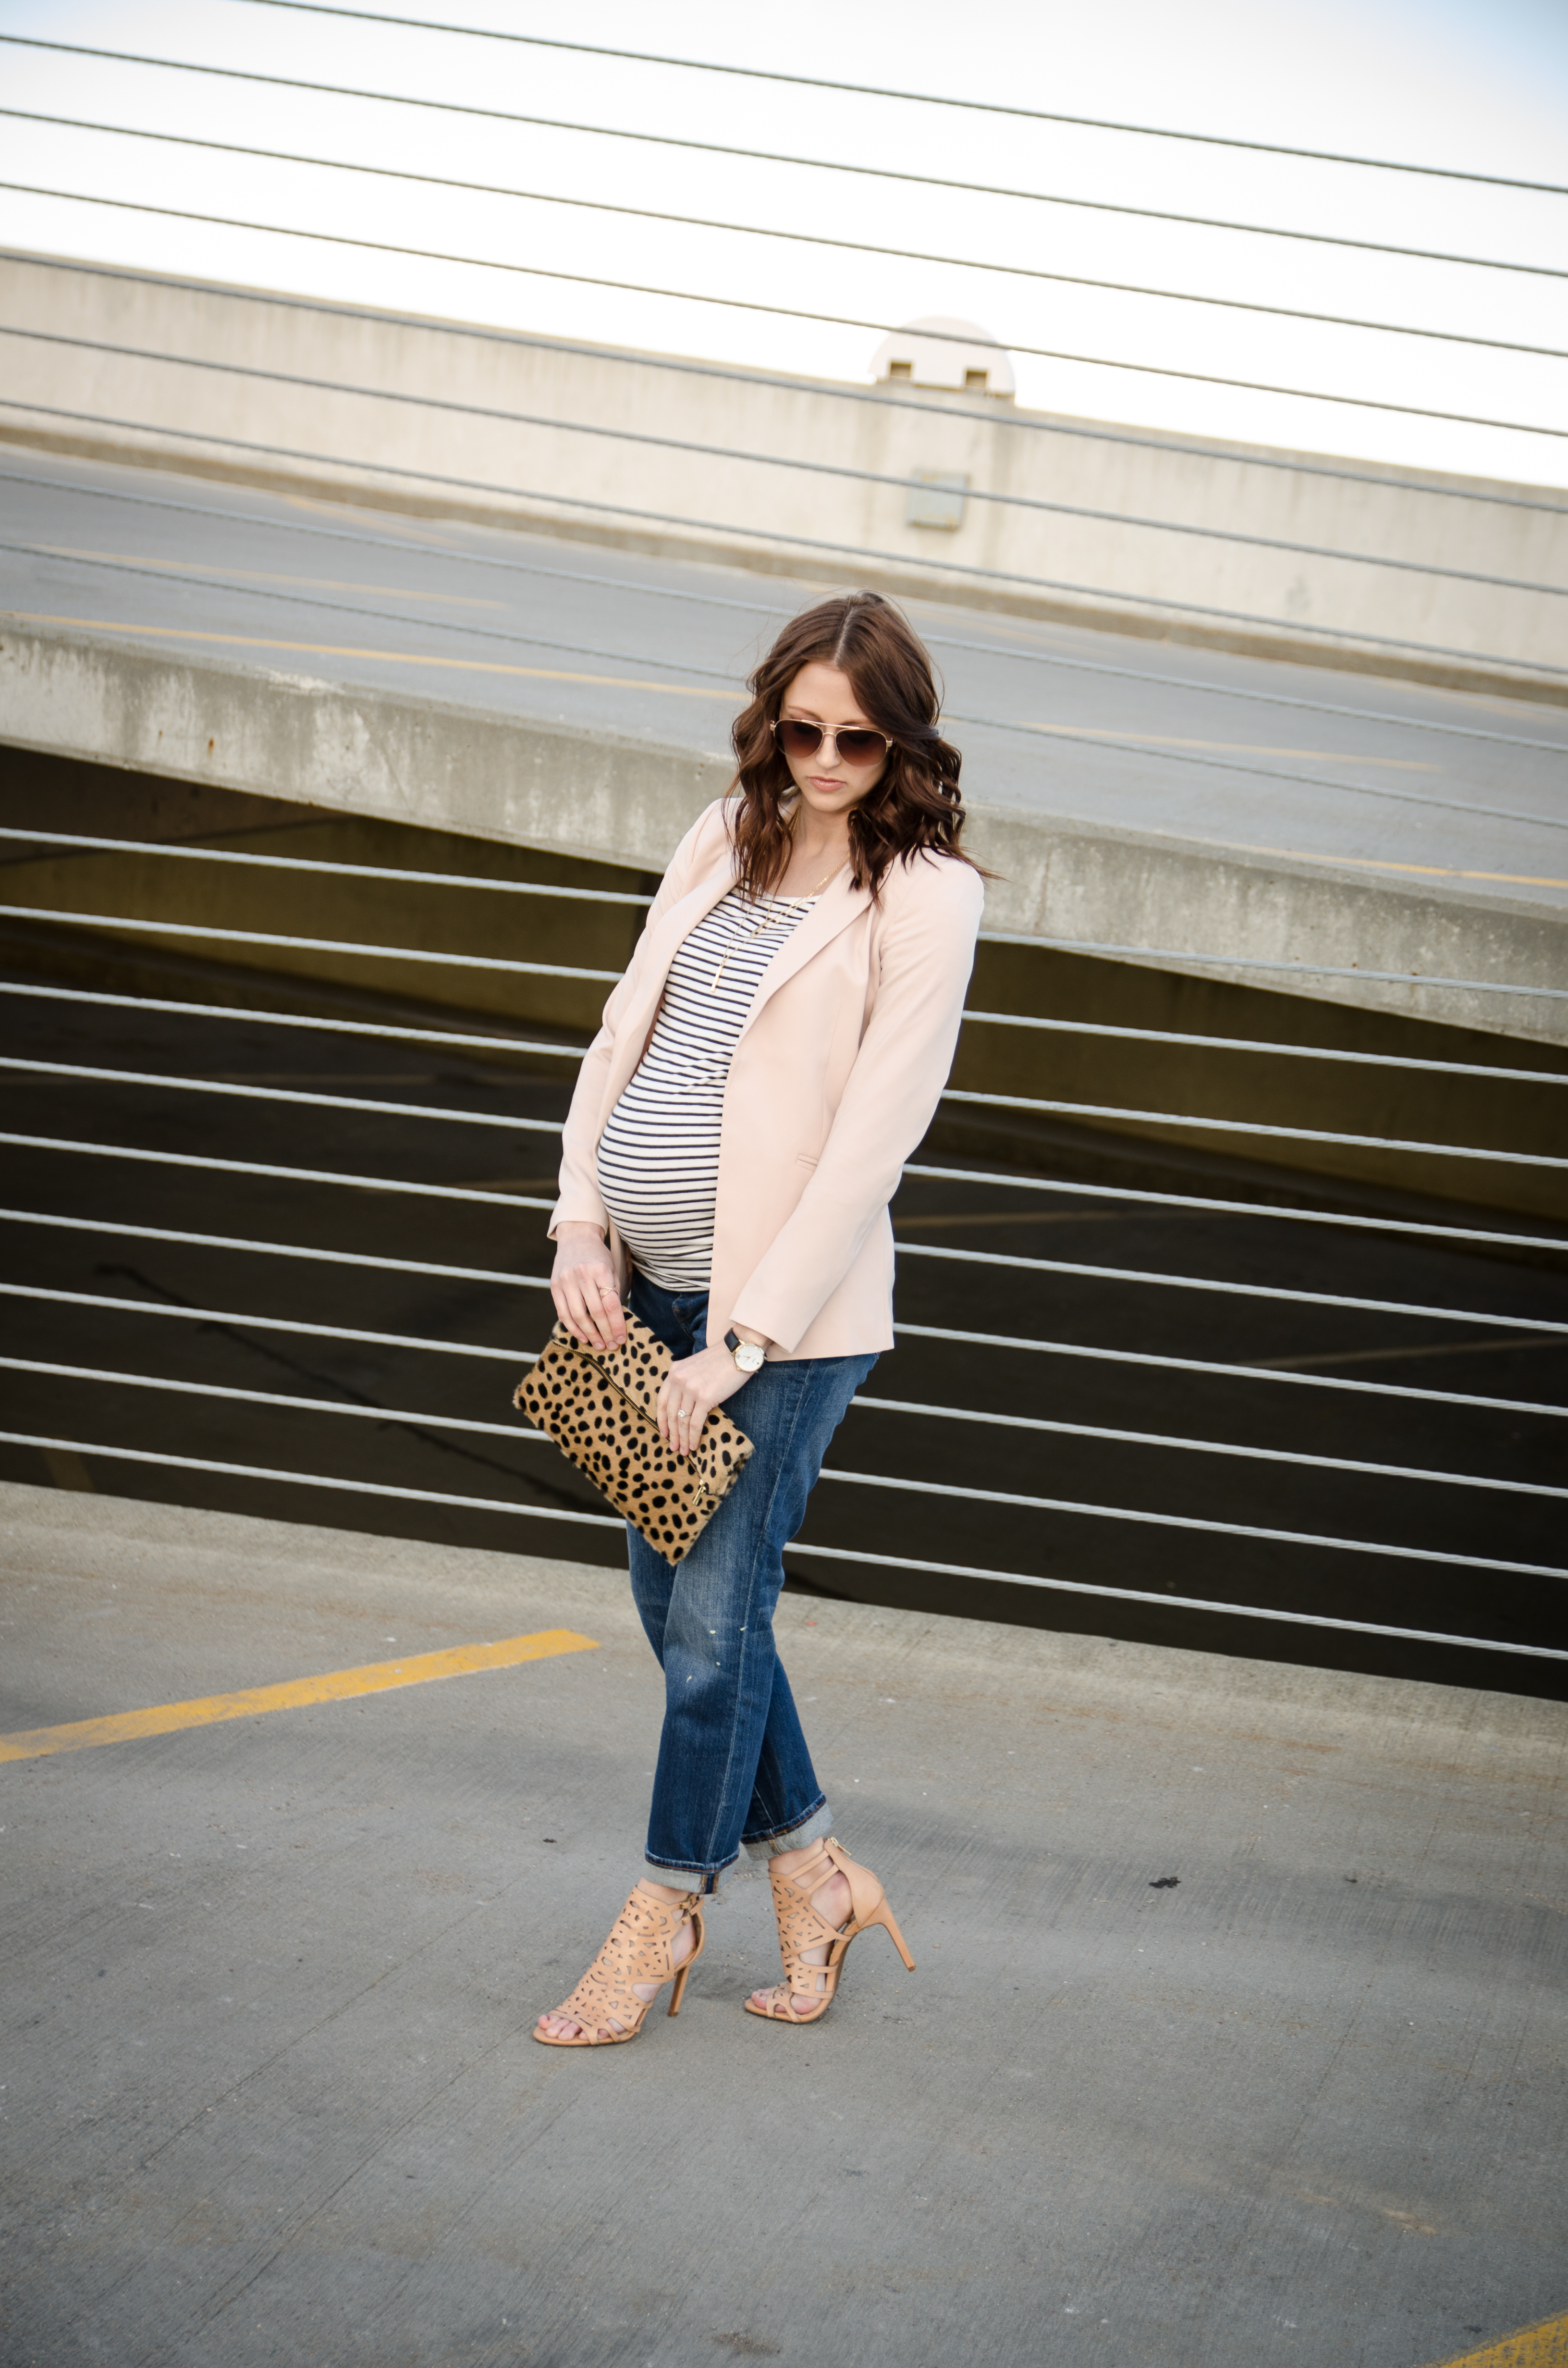 Spring Pastels - Midwest In Style